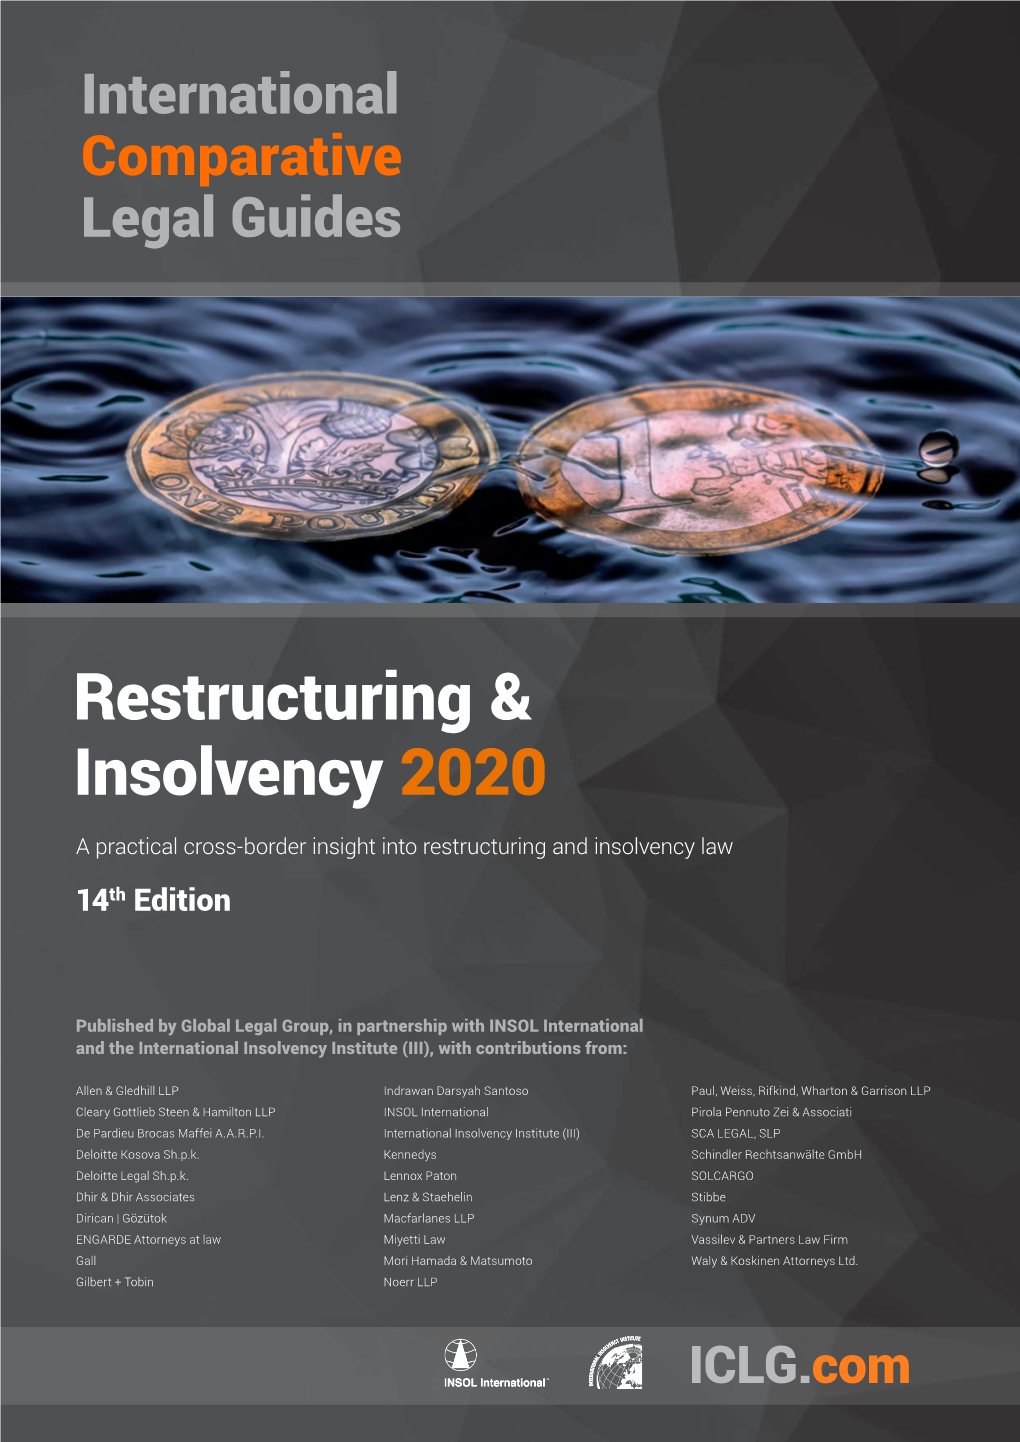 Restructuring & Insolvency 2020